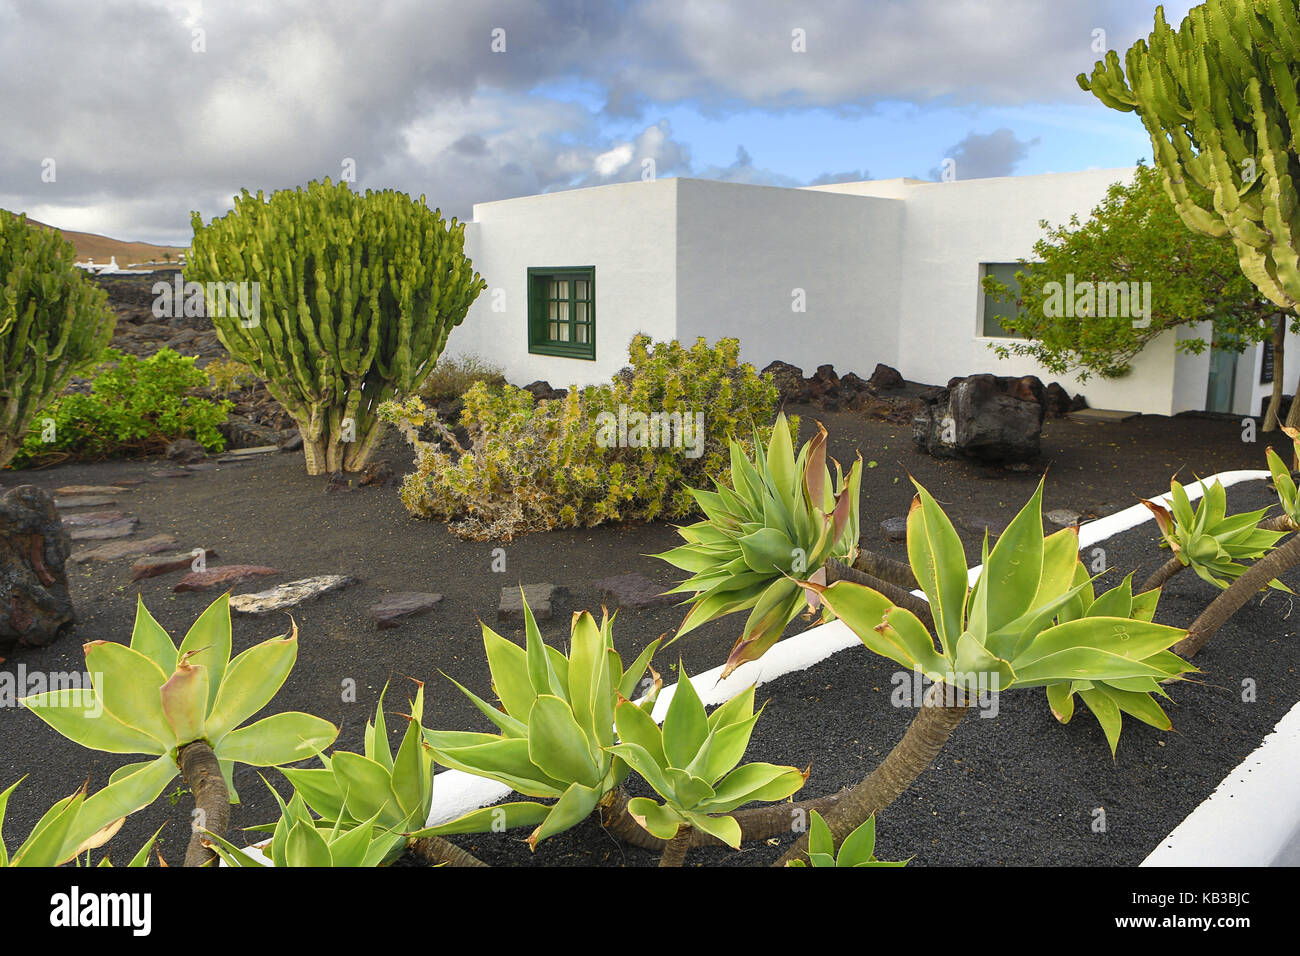 Spain, Canary islands, Lanzarote, traditional architecture, garden, plants, Stock Photo